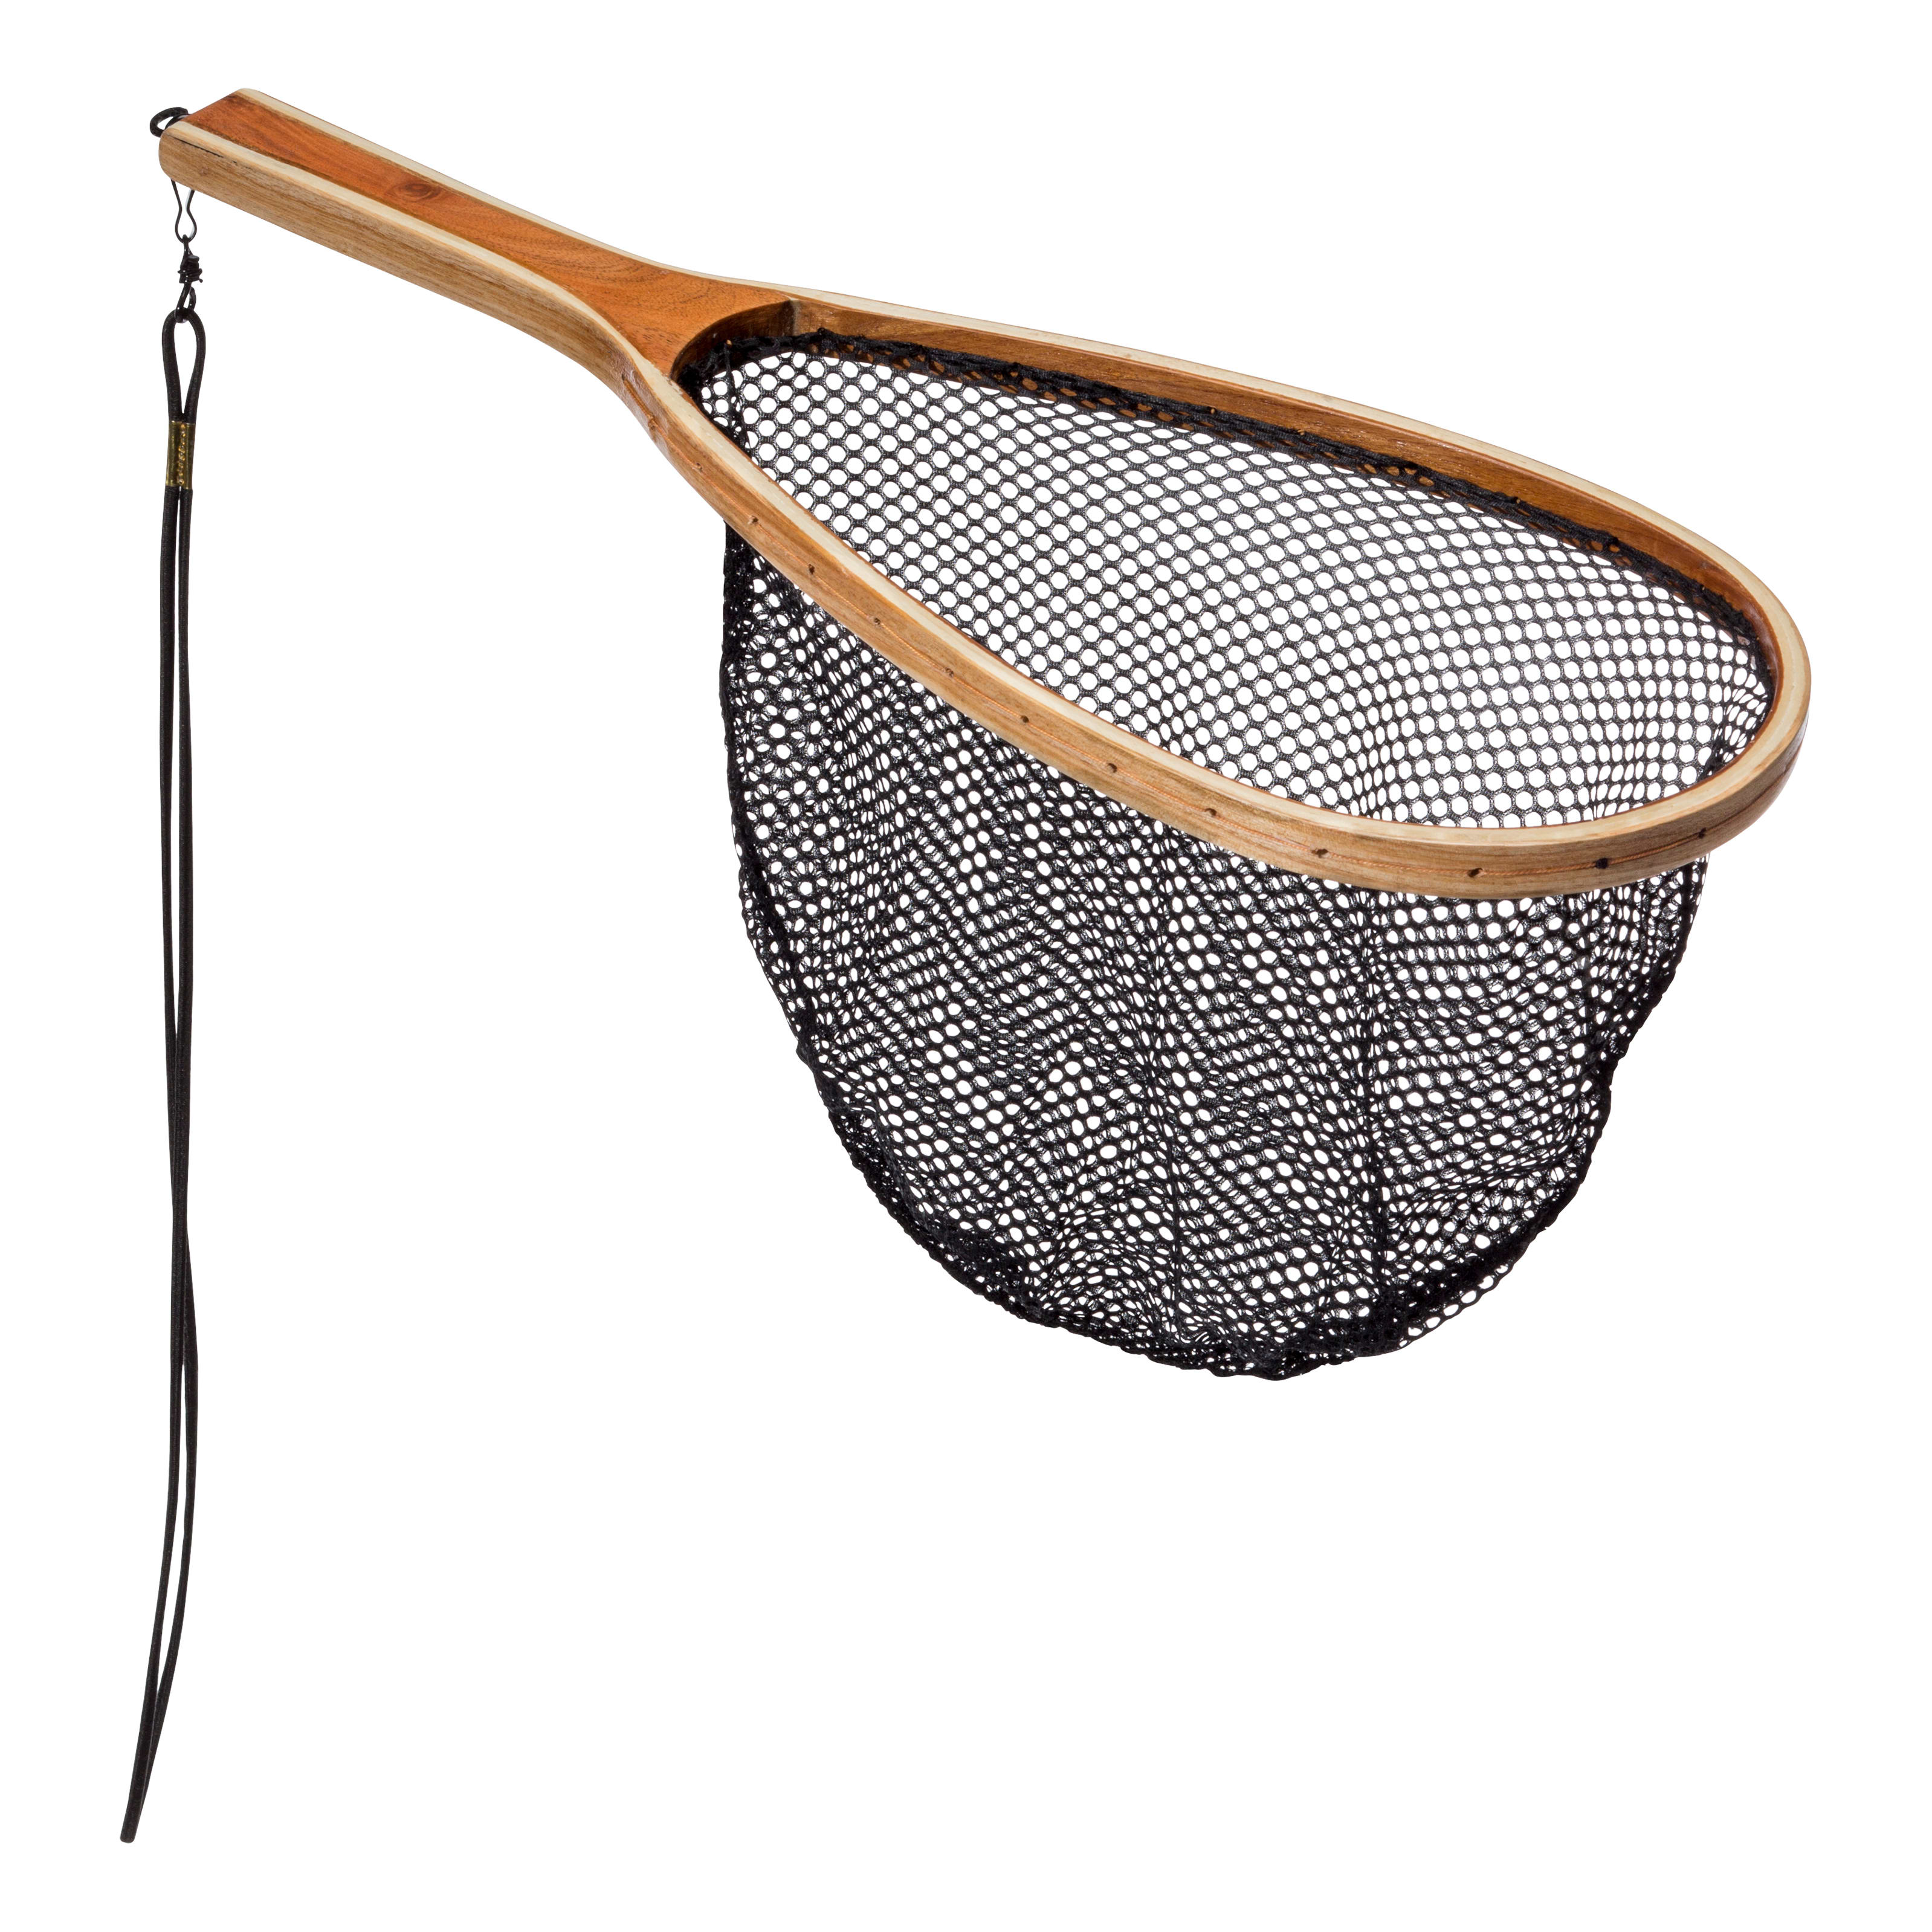 White River Fly Shops Trout Net